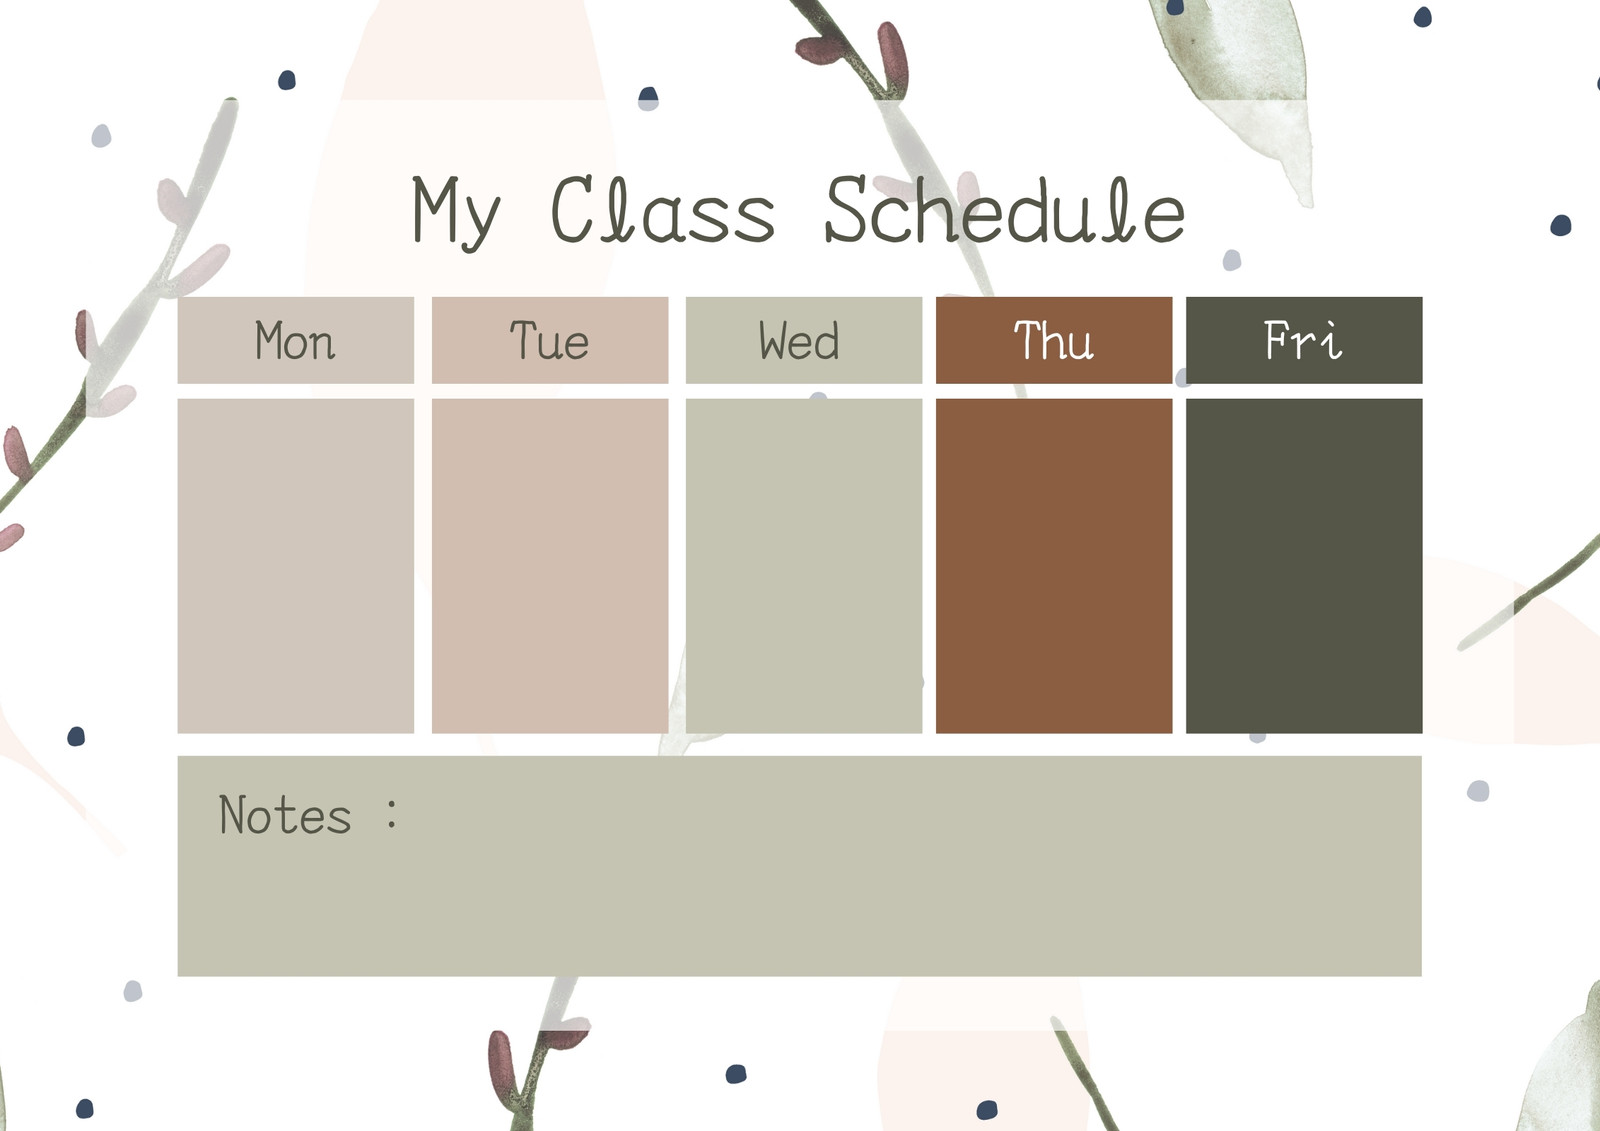 Free printable class schedule templates to customize